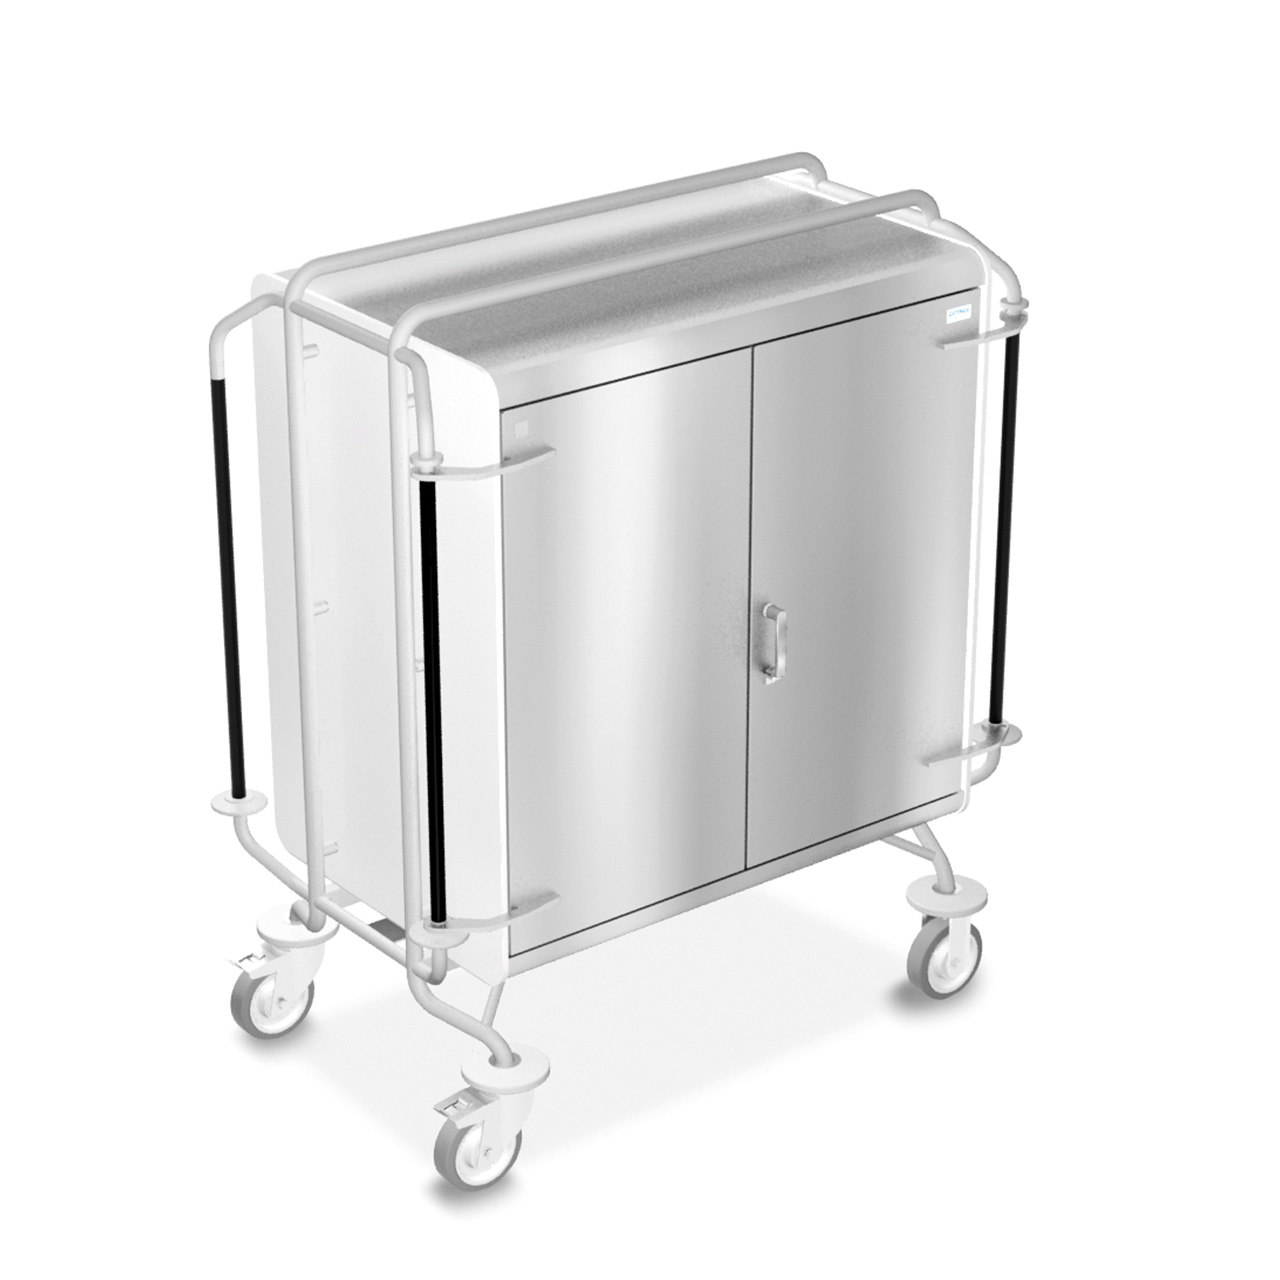 Smart distribution trolleys hard cover (DTHC) are designed for the effective, ergonomic transport of baskets or containers. 